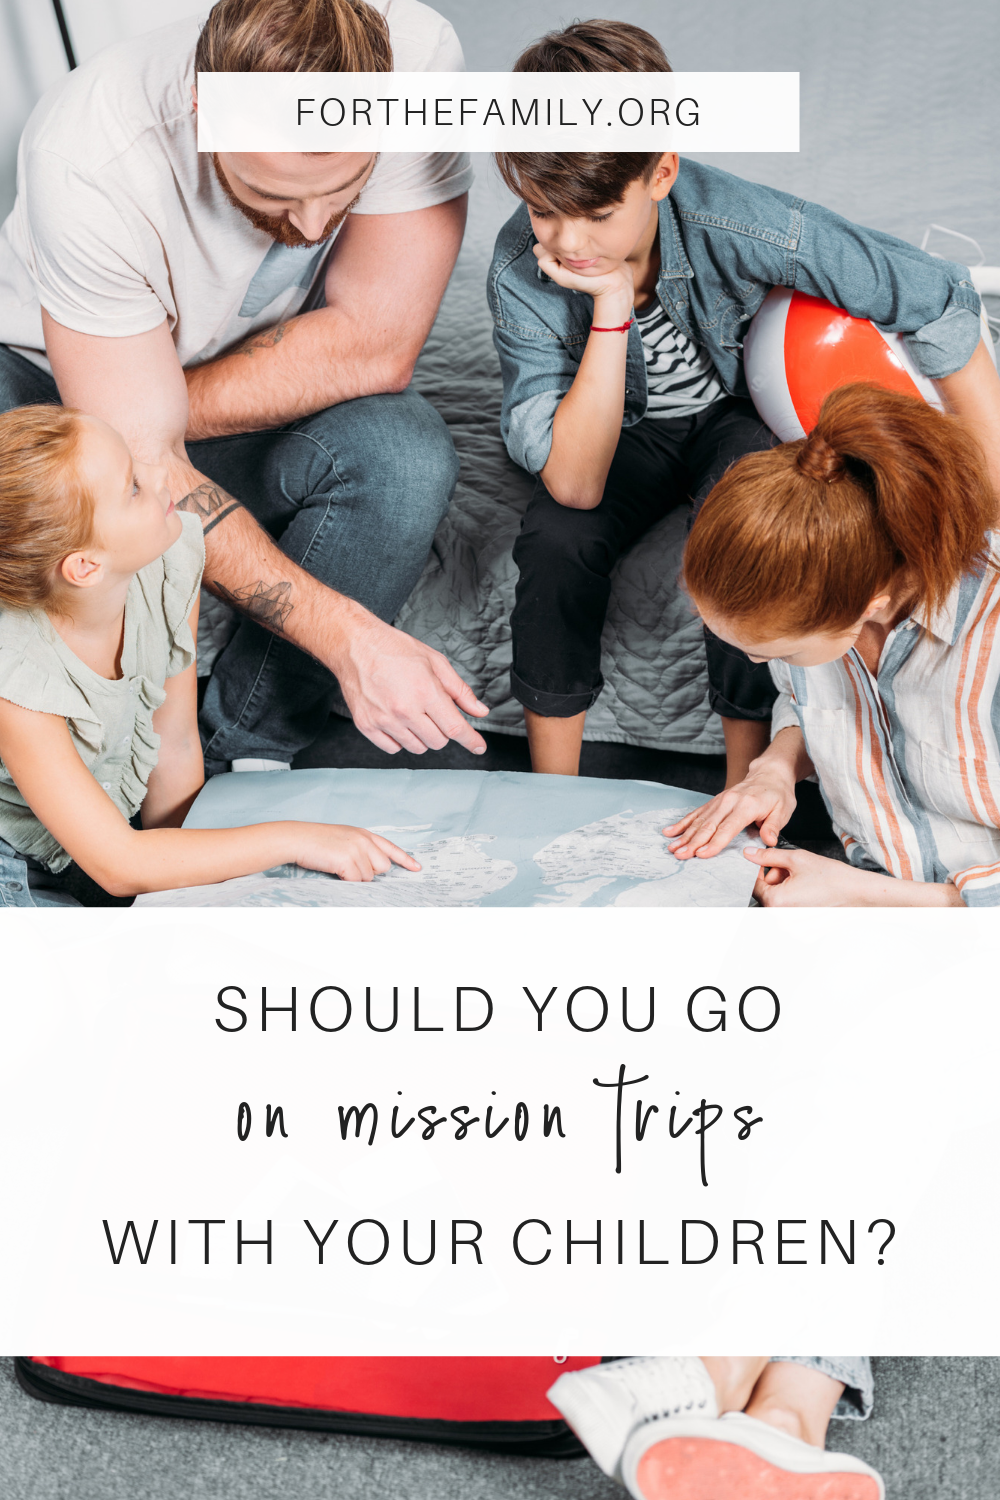 Should You Go On Mission Trips With Your Children?